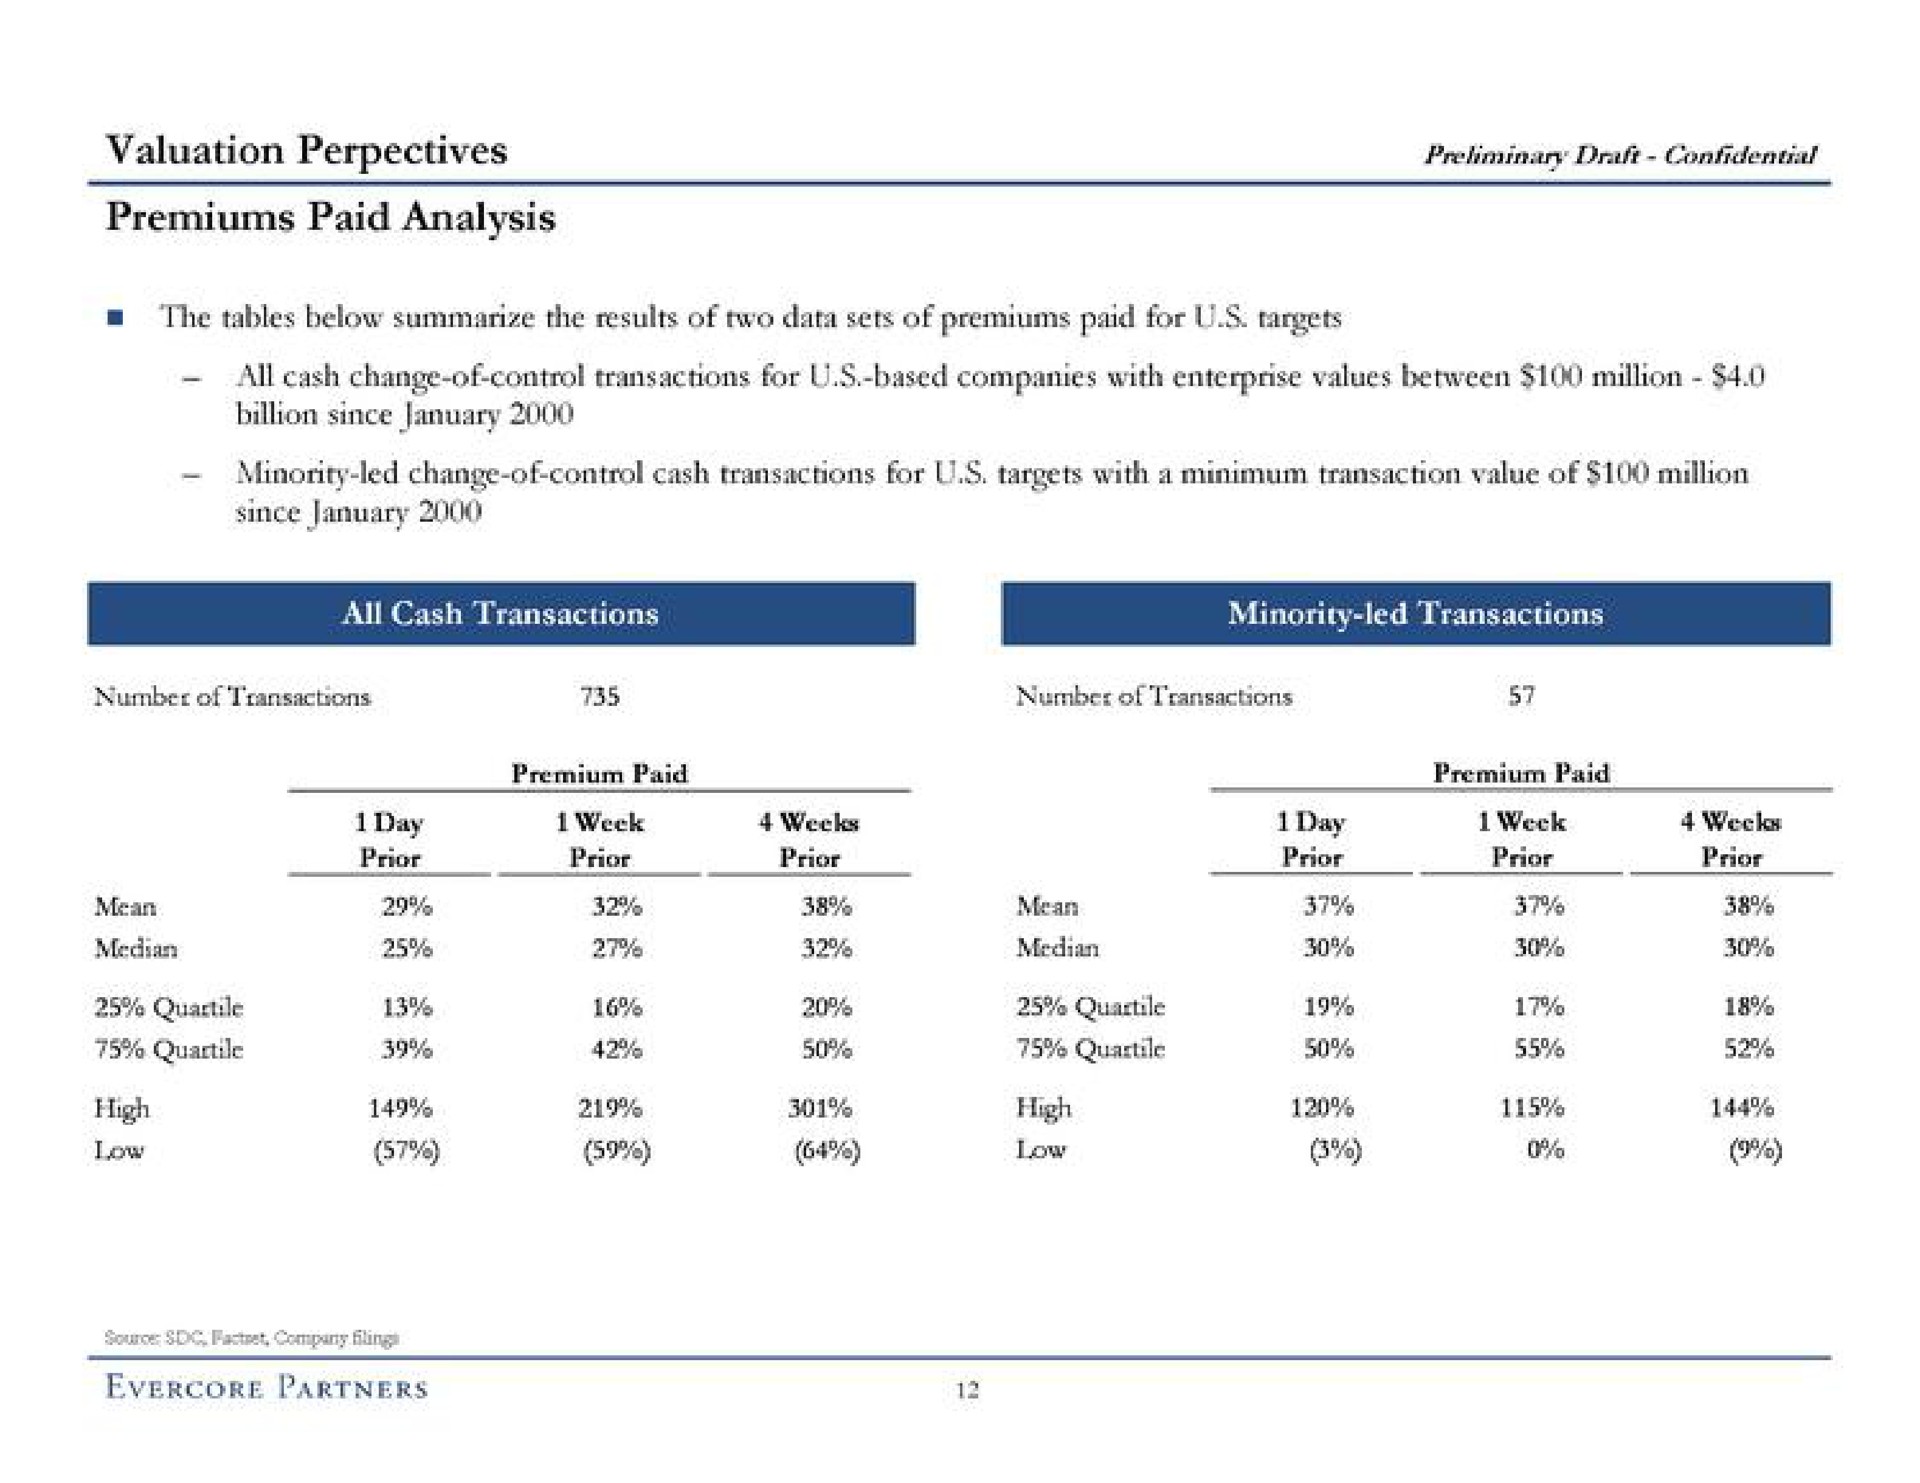 valuation premiums paid analysis preliminary draft low low | Evercore